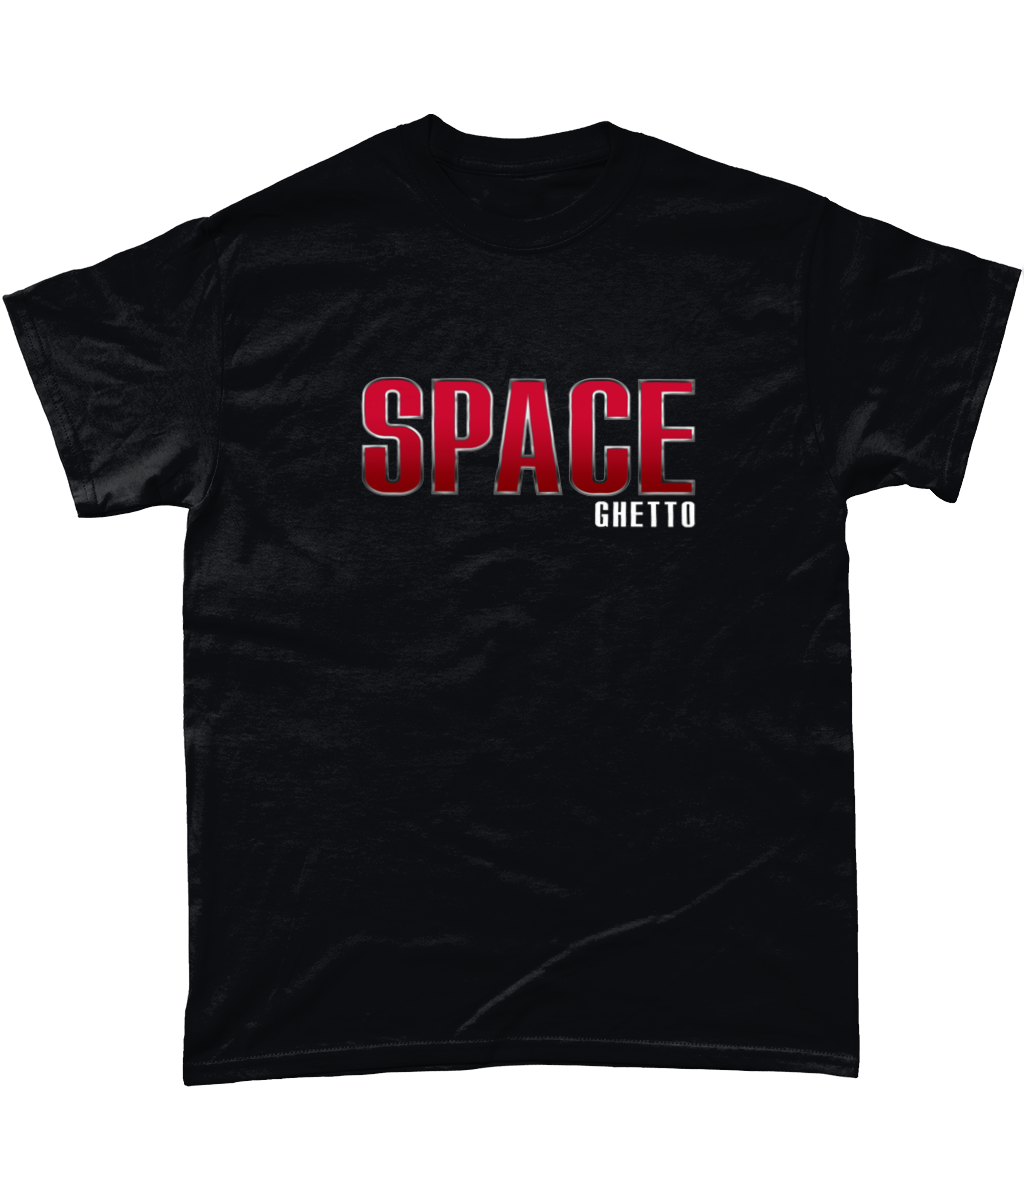 Space Ghetto T-Shirt - SNATCHED MERCH